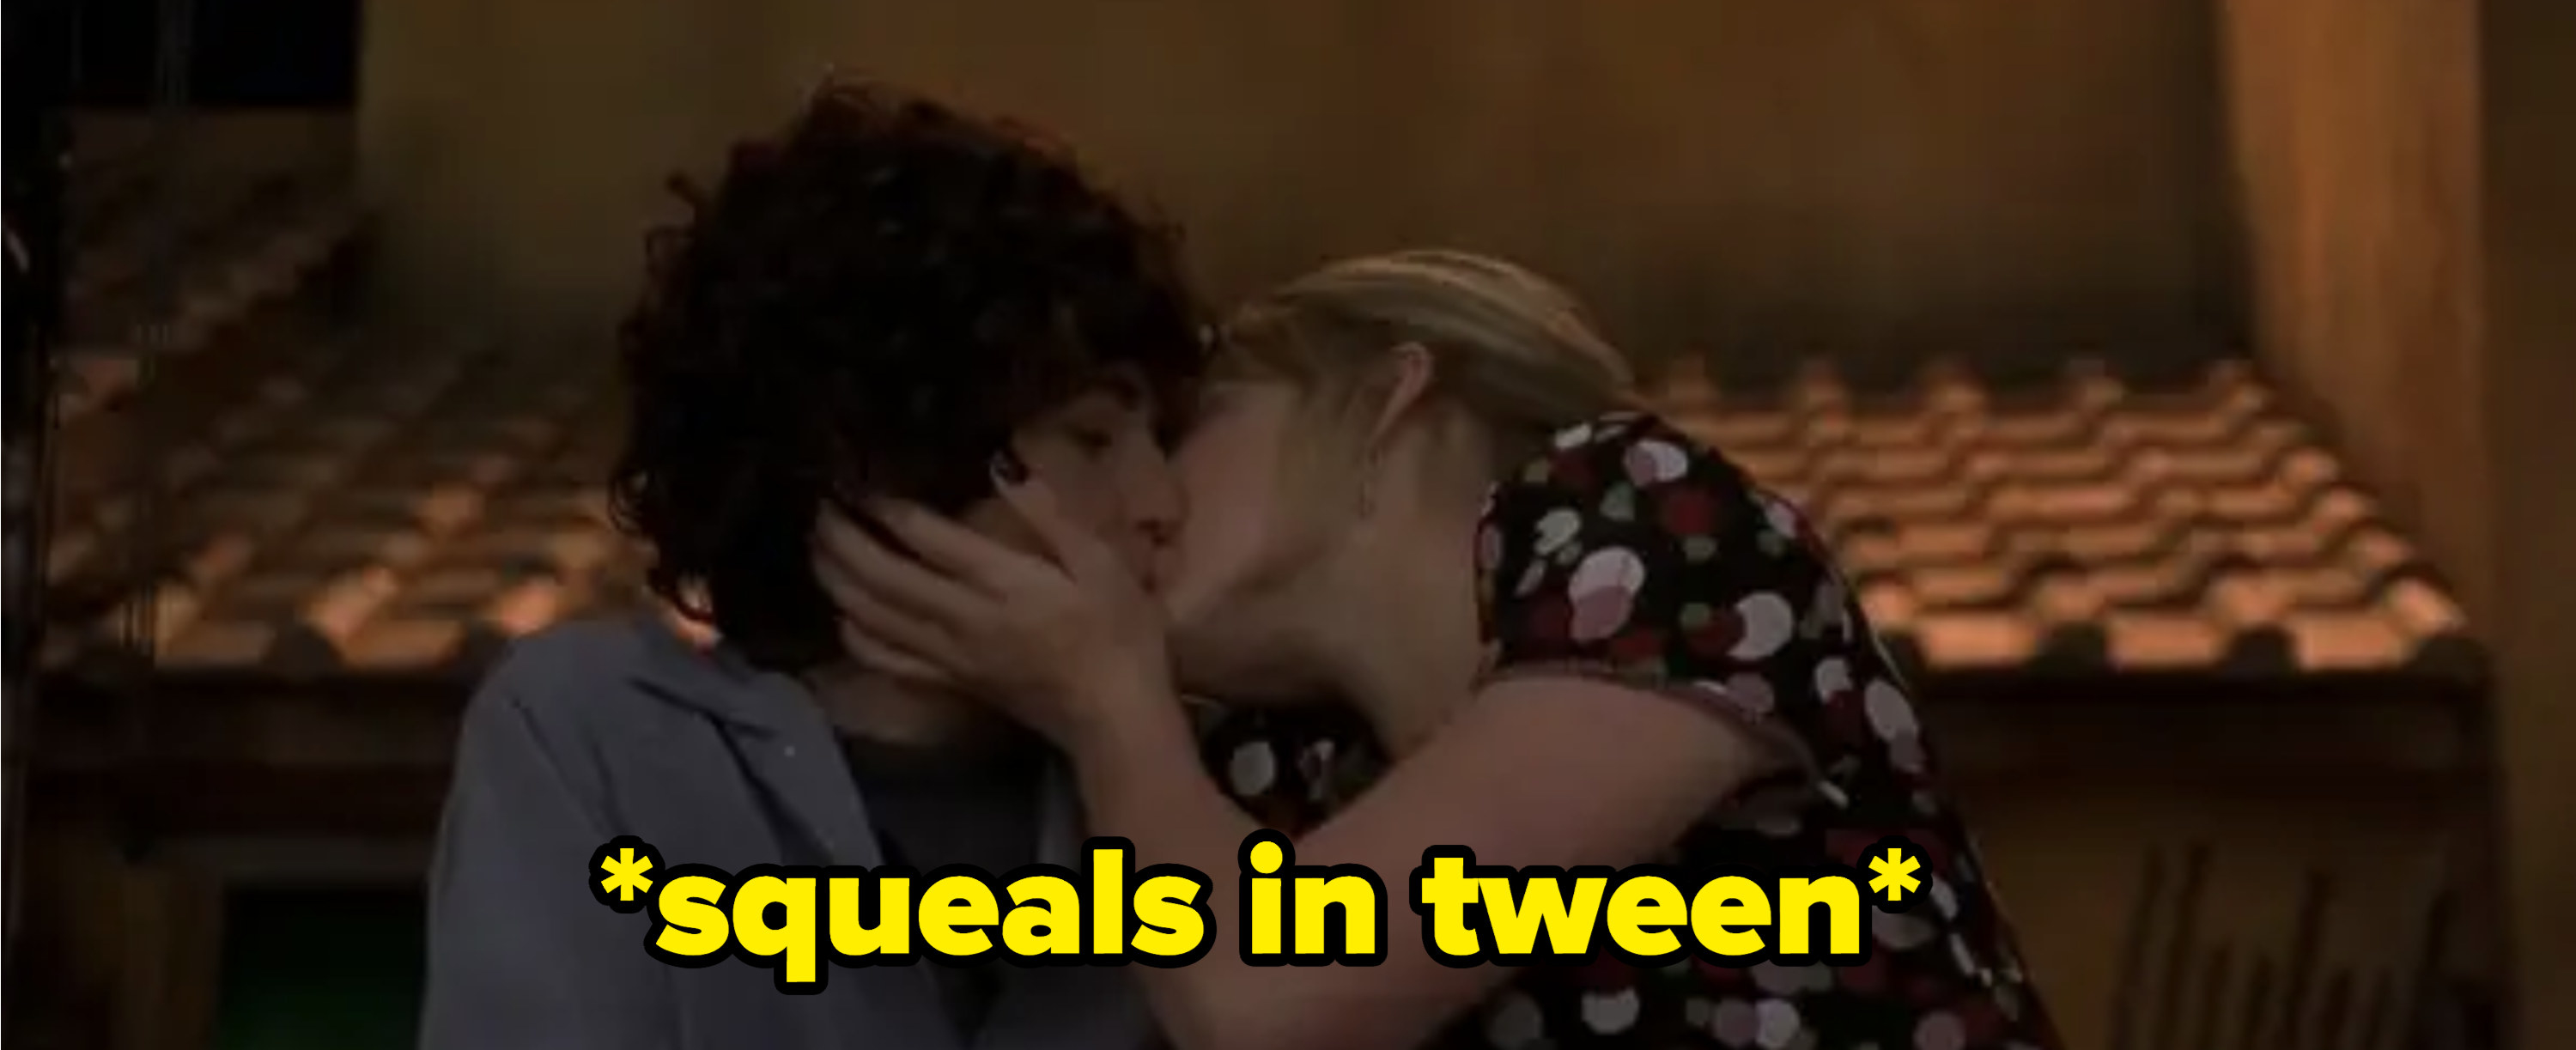 Lizzie and Gordo kiss with the caption &quot;squeals in tween*